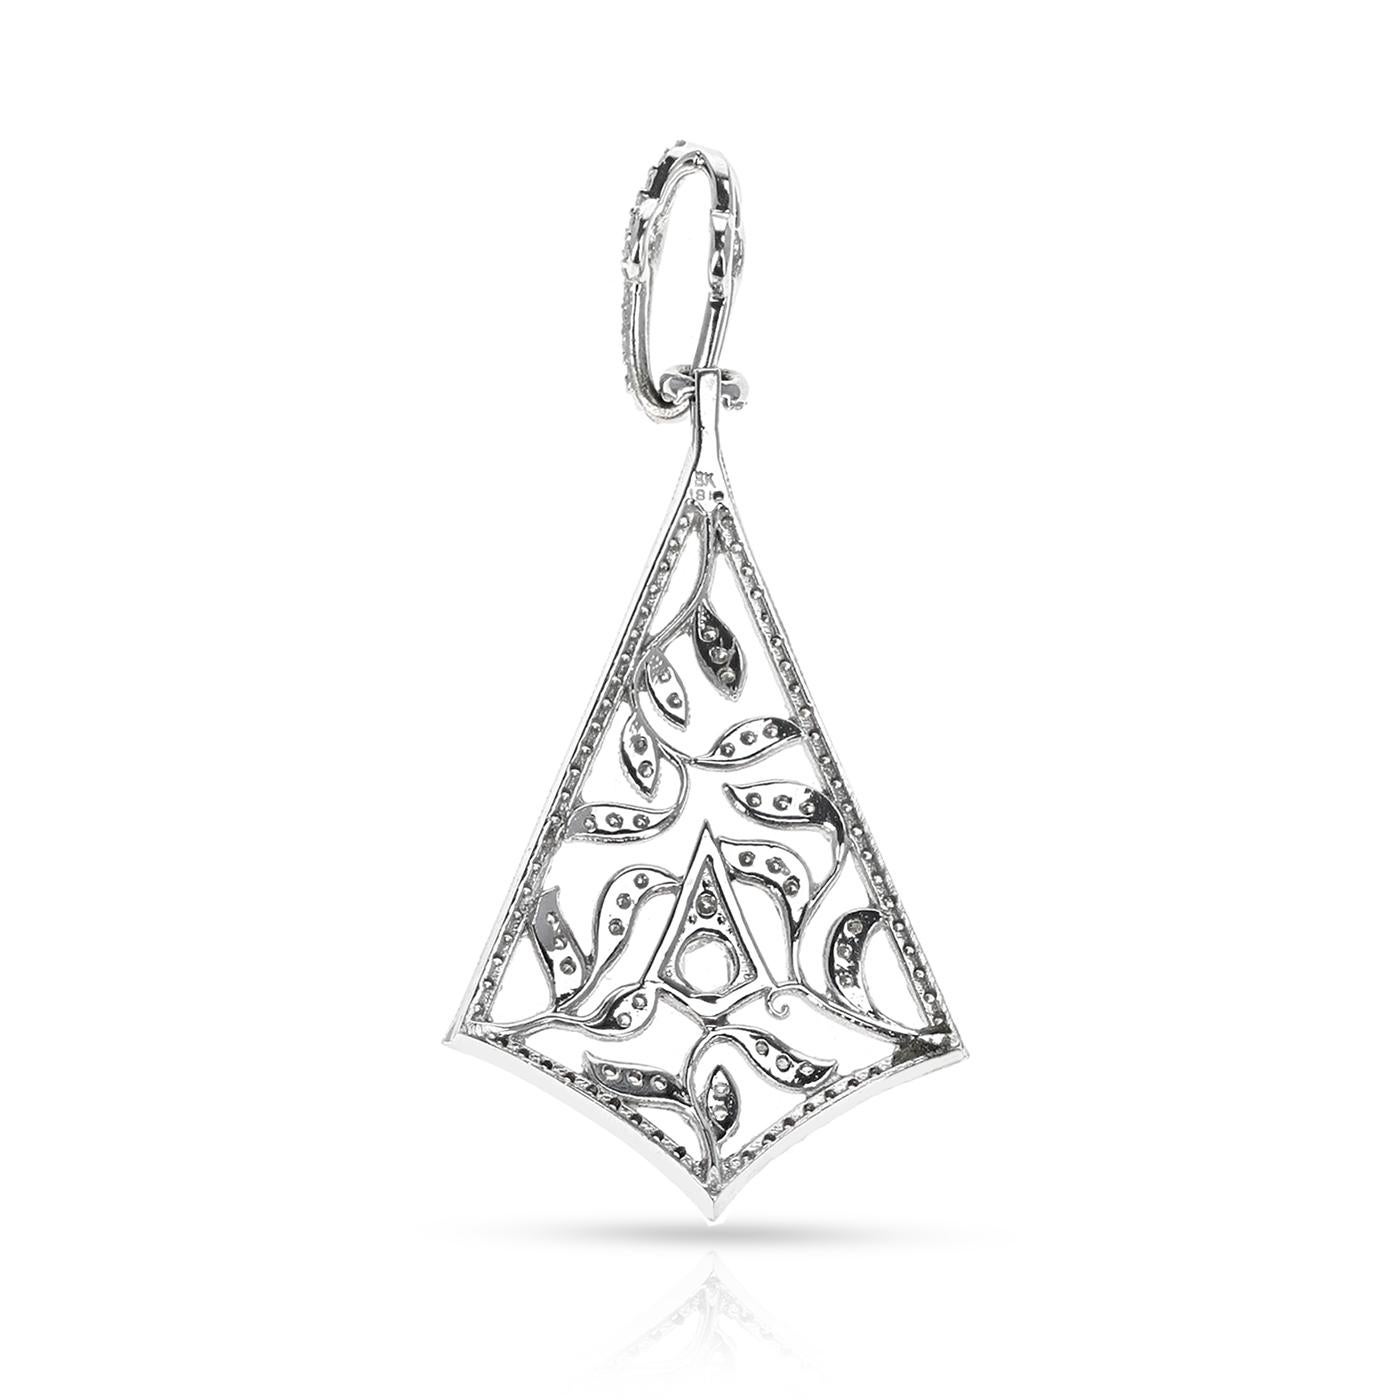 A Diamond Rose Cut and Round Diamond Kite-Shape Pendant. The length of the pendant is 2.5 inches. The total weight of the diamonds is appx. 1.20 carats. The total weight of the pendant is 11.20 grams. 